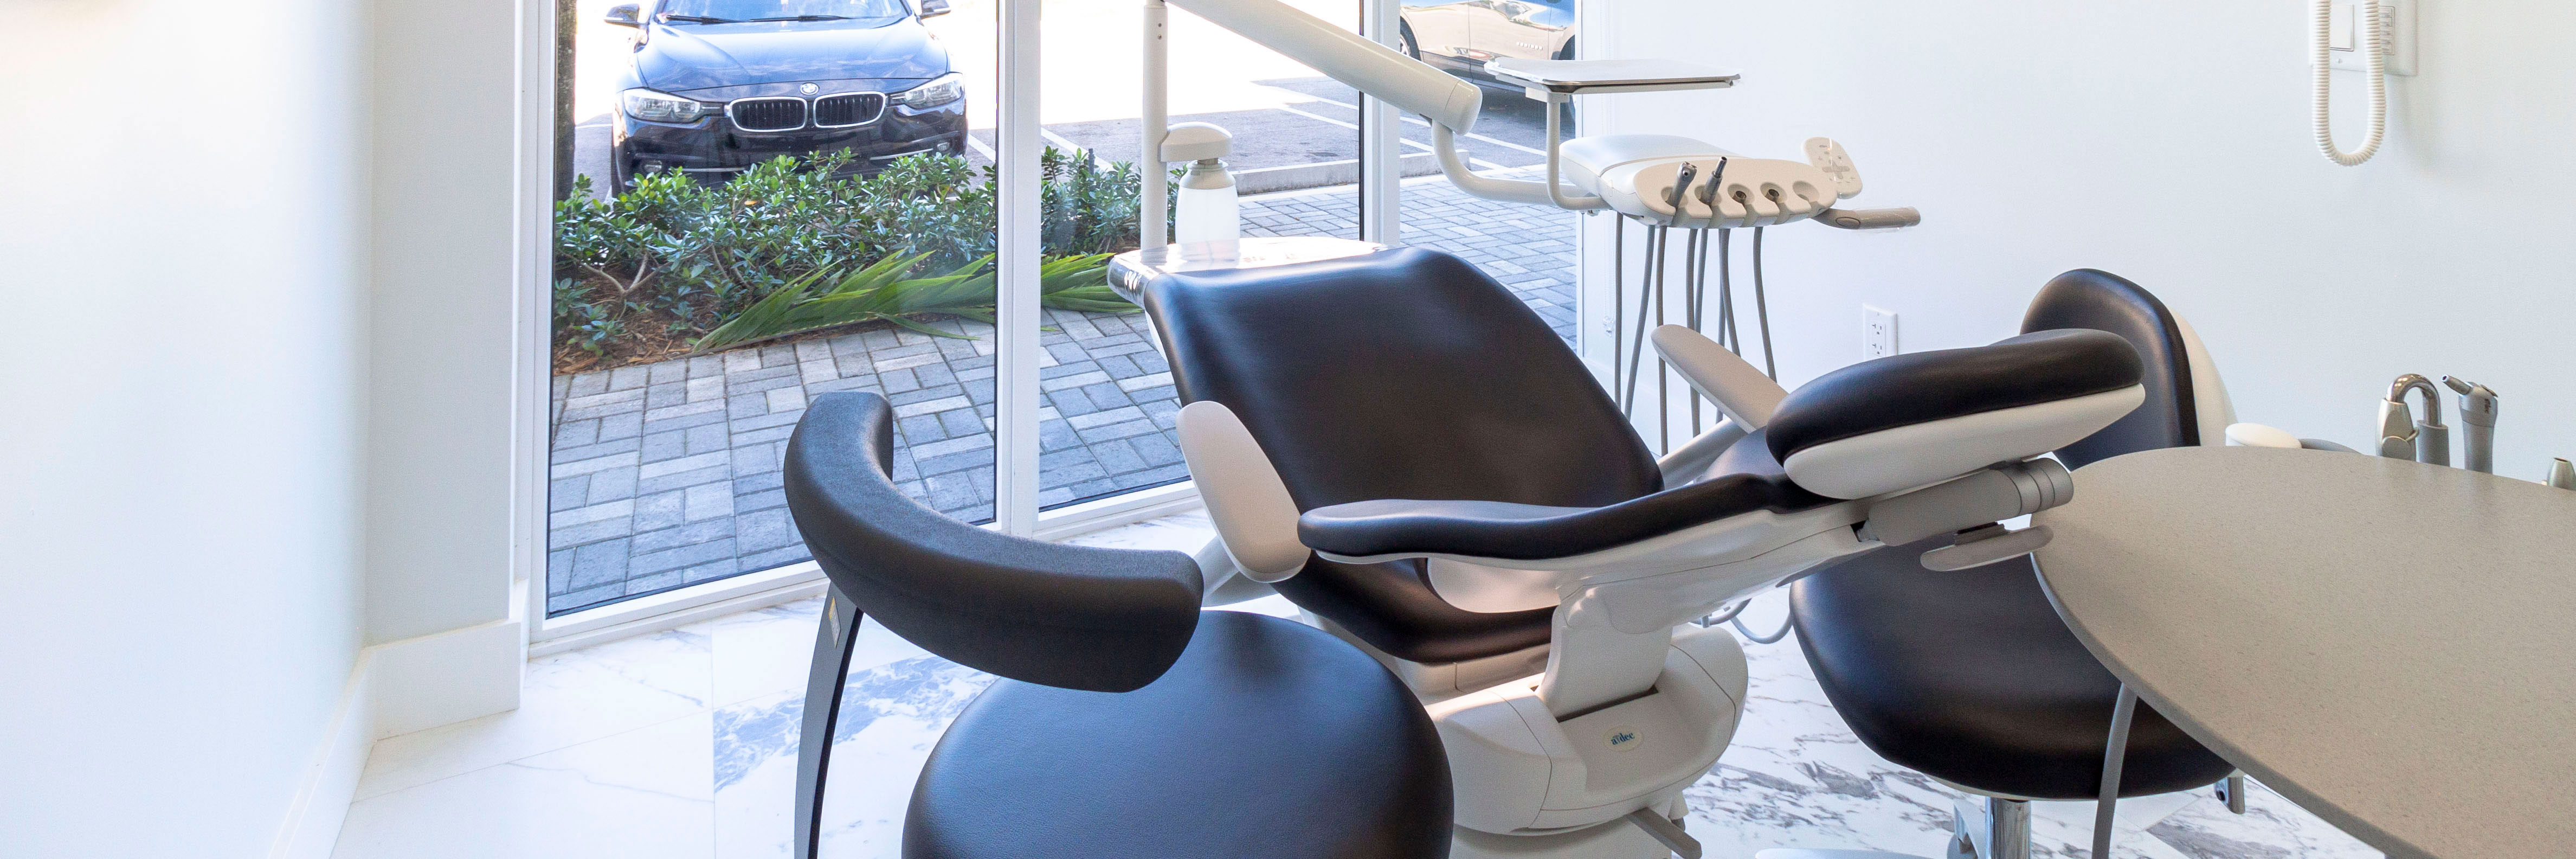 My Smile Dentistry | Cosmetic Crowns, Oral Surgery and Sedation Dentistry